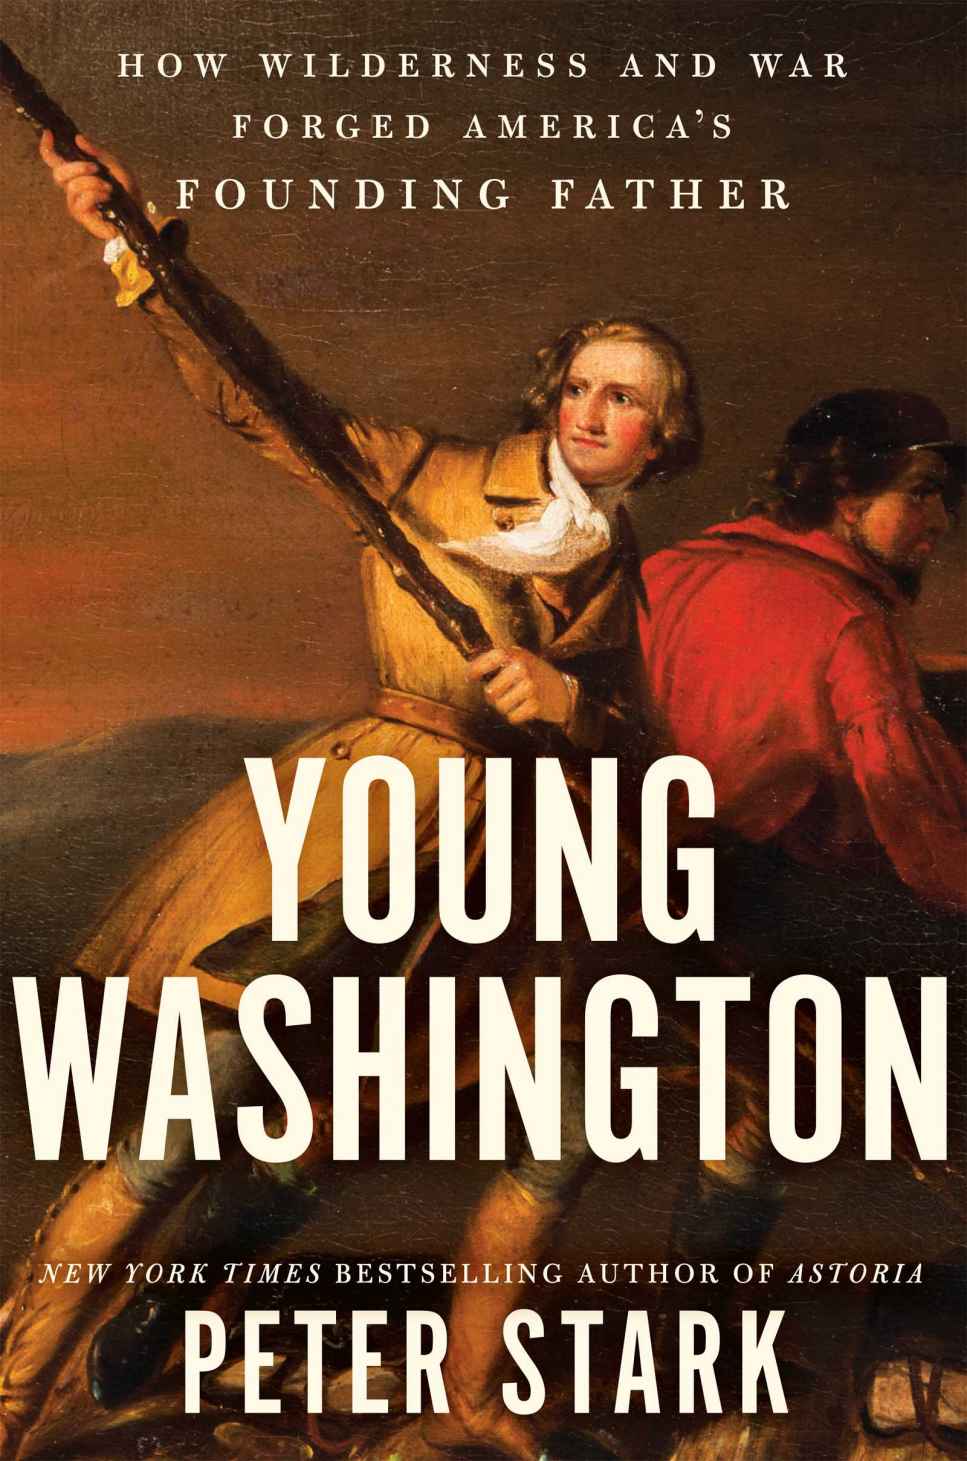 The Young George Washington, by Peter Stark